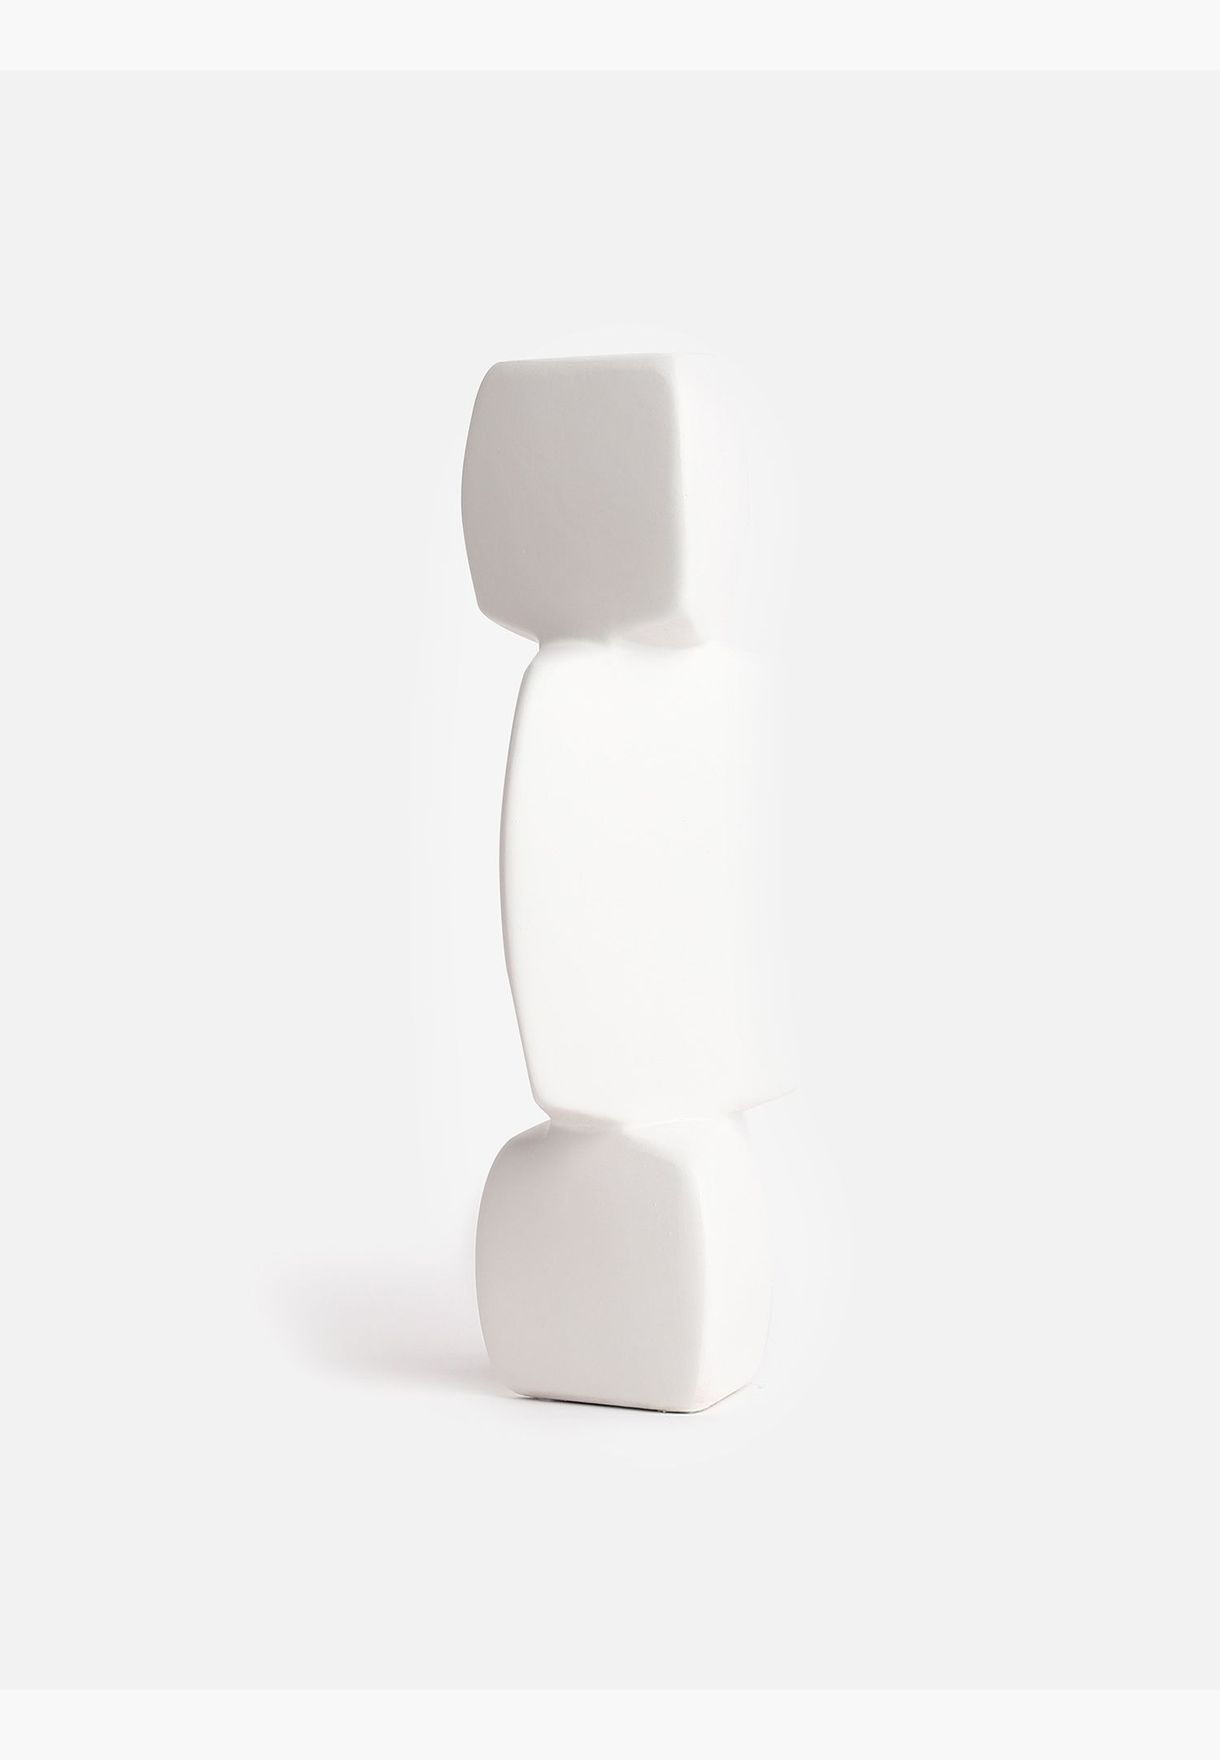 Abstract Shaped Minimalistic Modern Ceramic Vase  For Home Decor